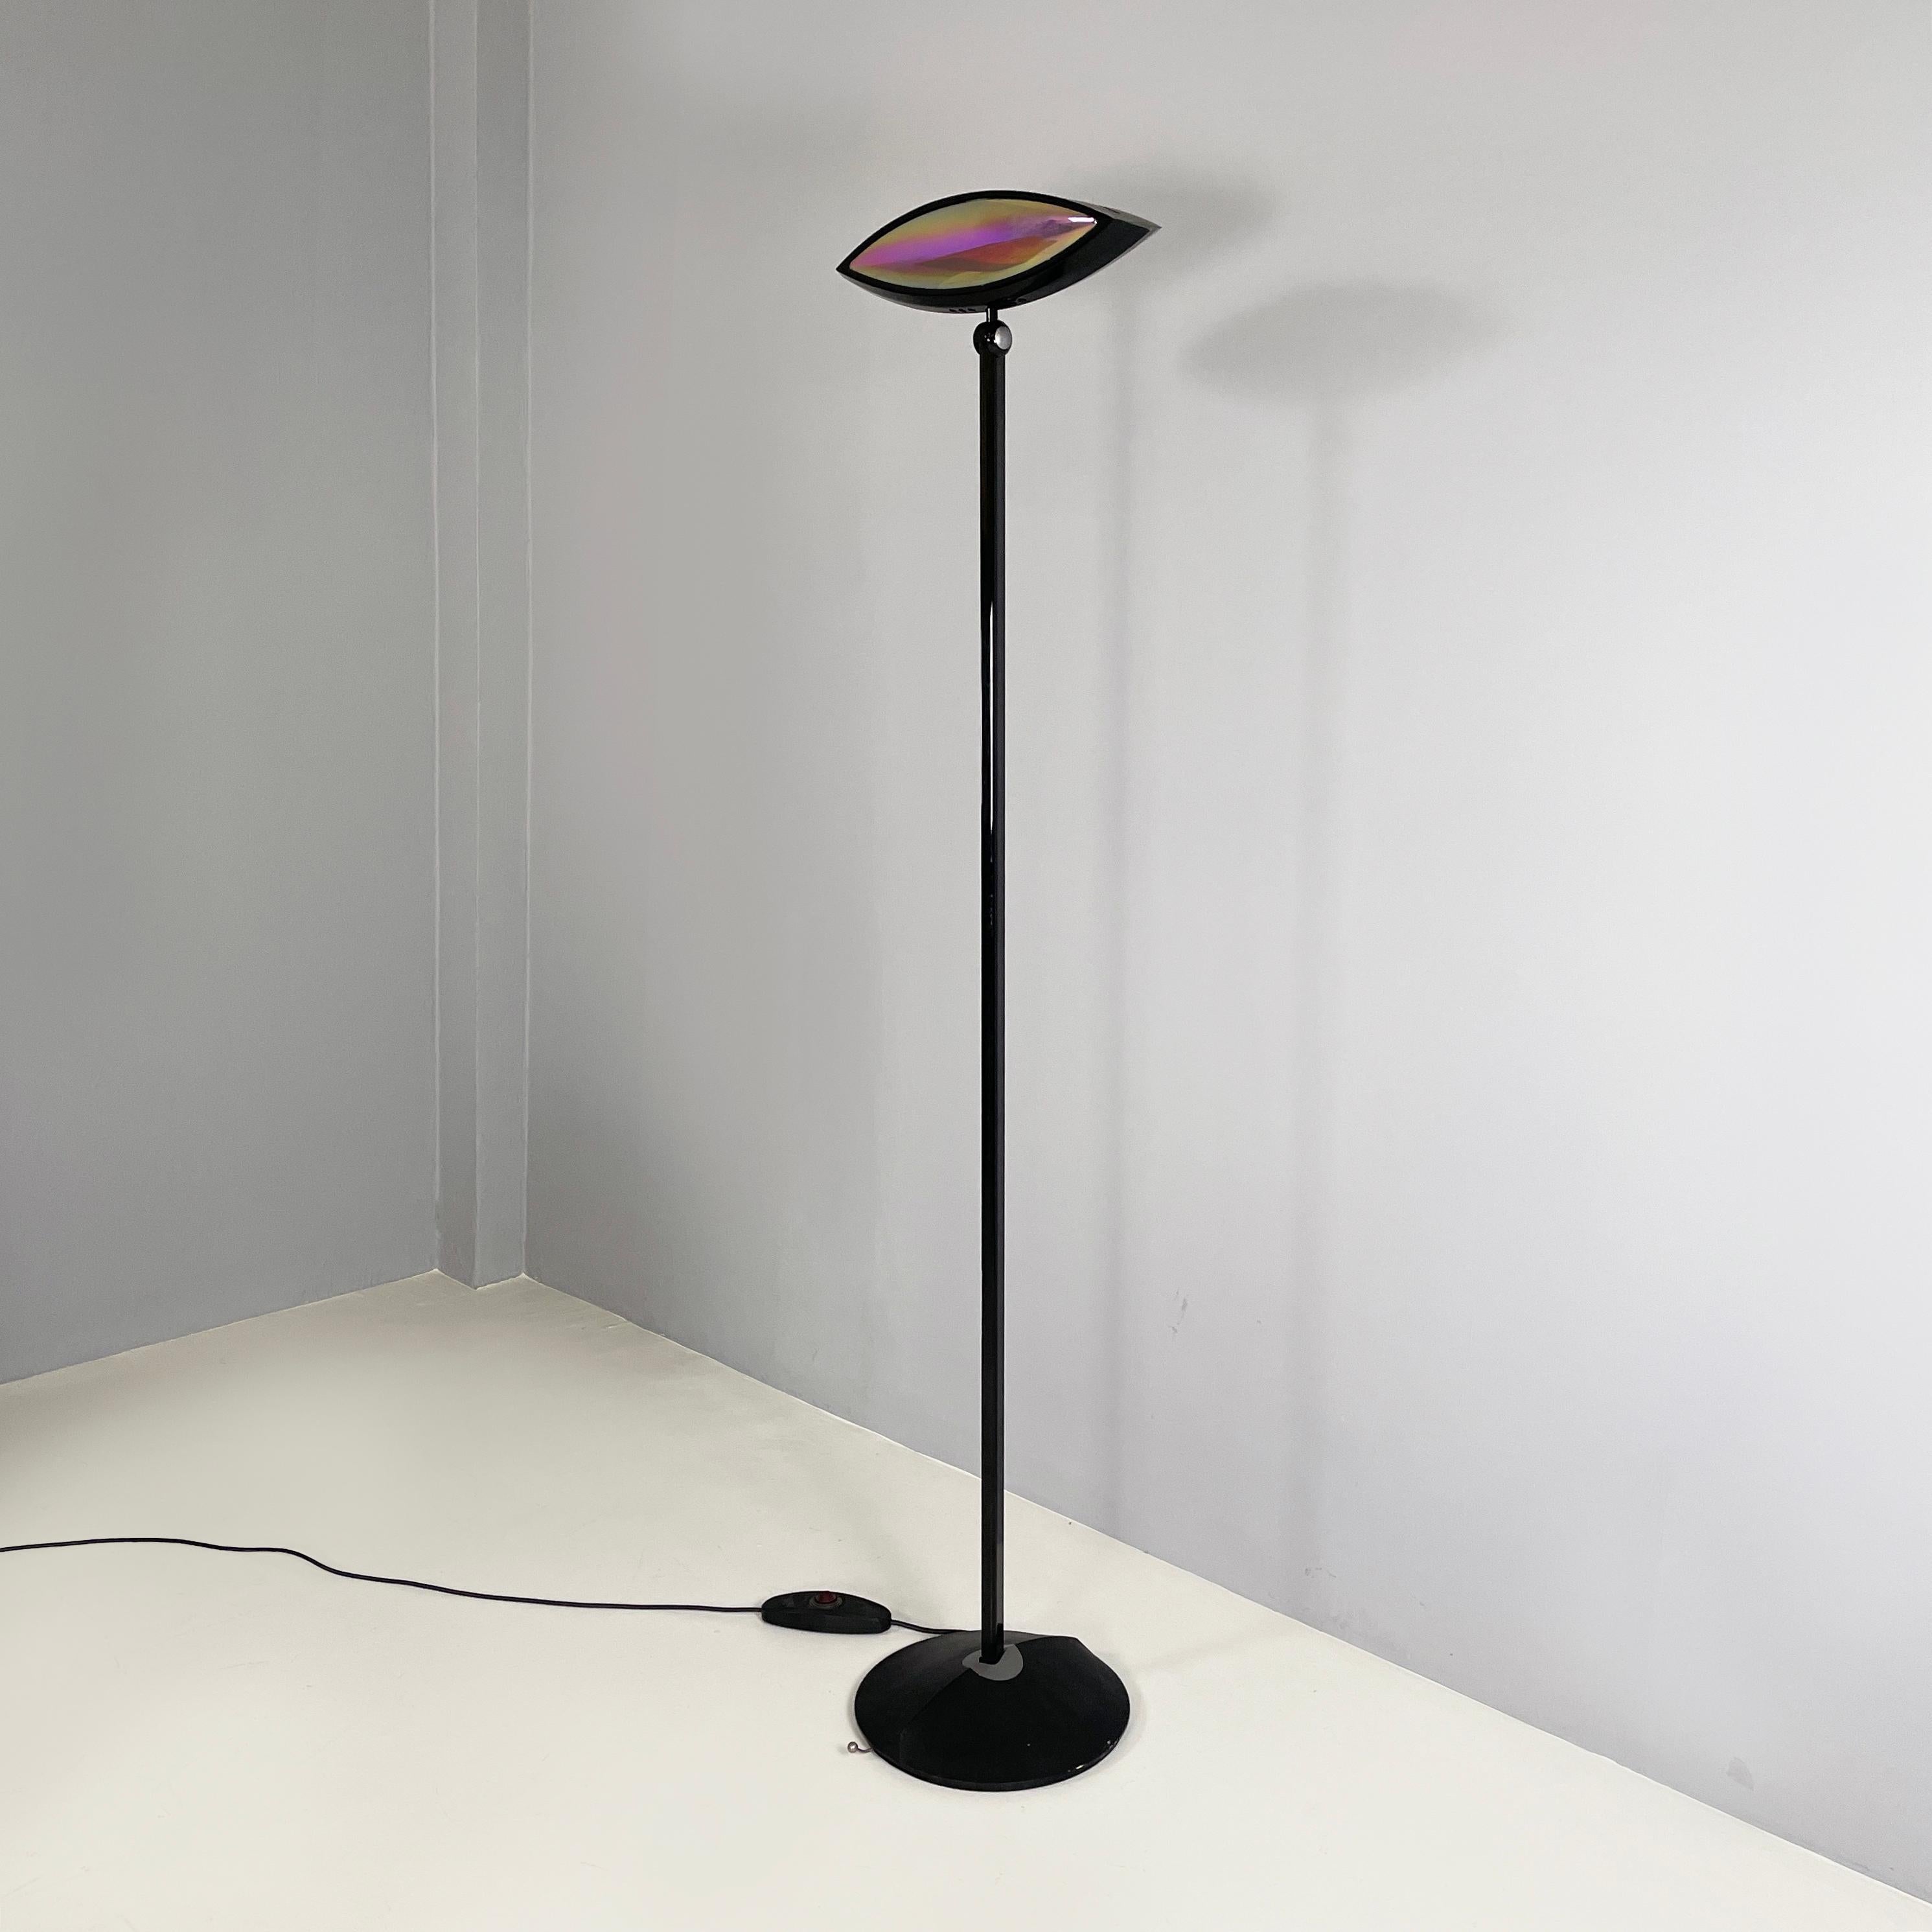 Modern Italian modern color glass and metal Floor lamp Aeto by Lombardo for Flos, 1980s For Sale